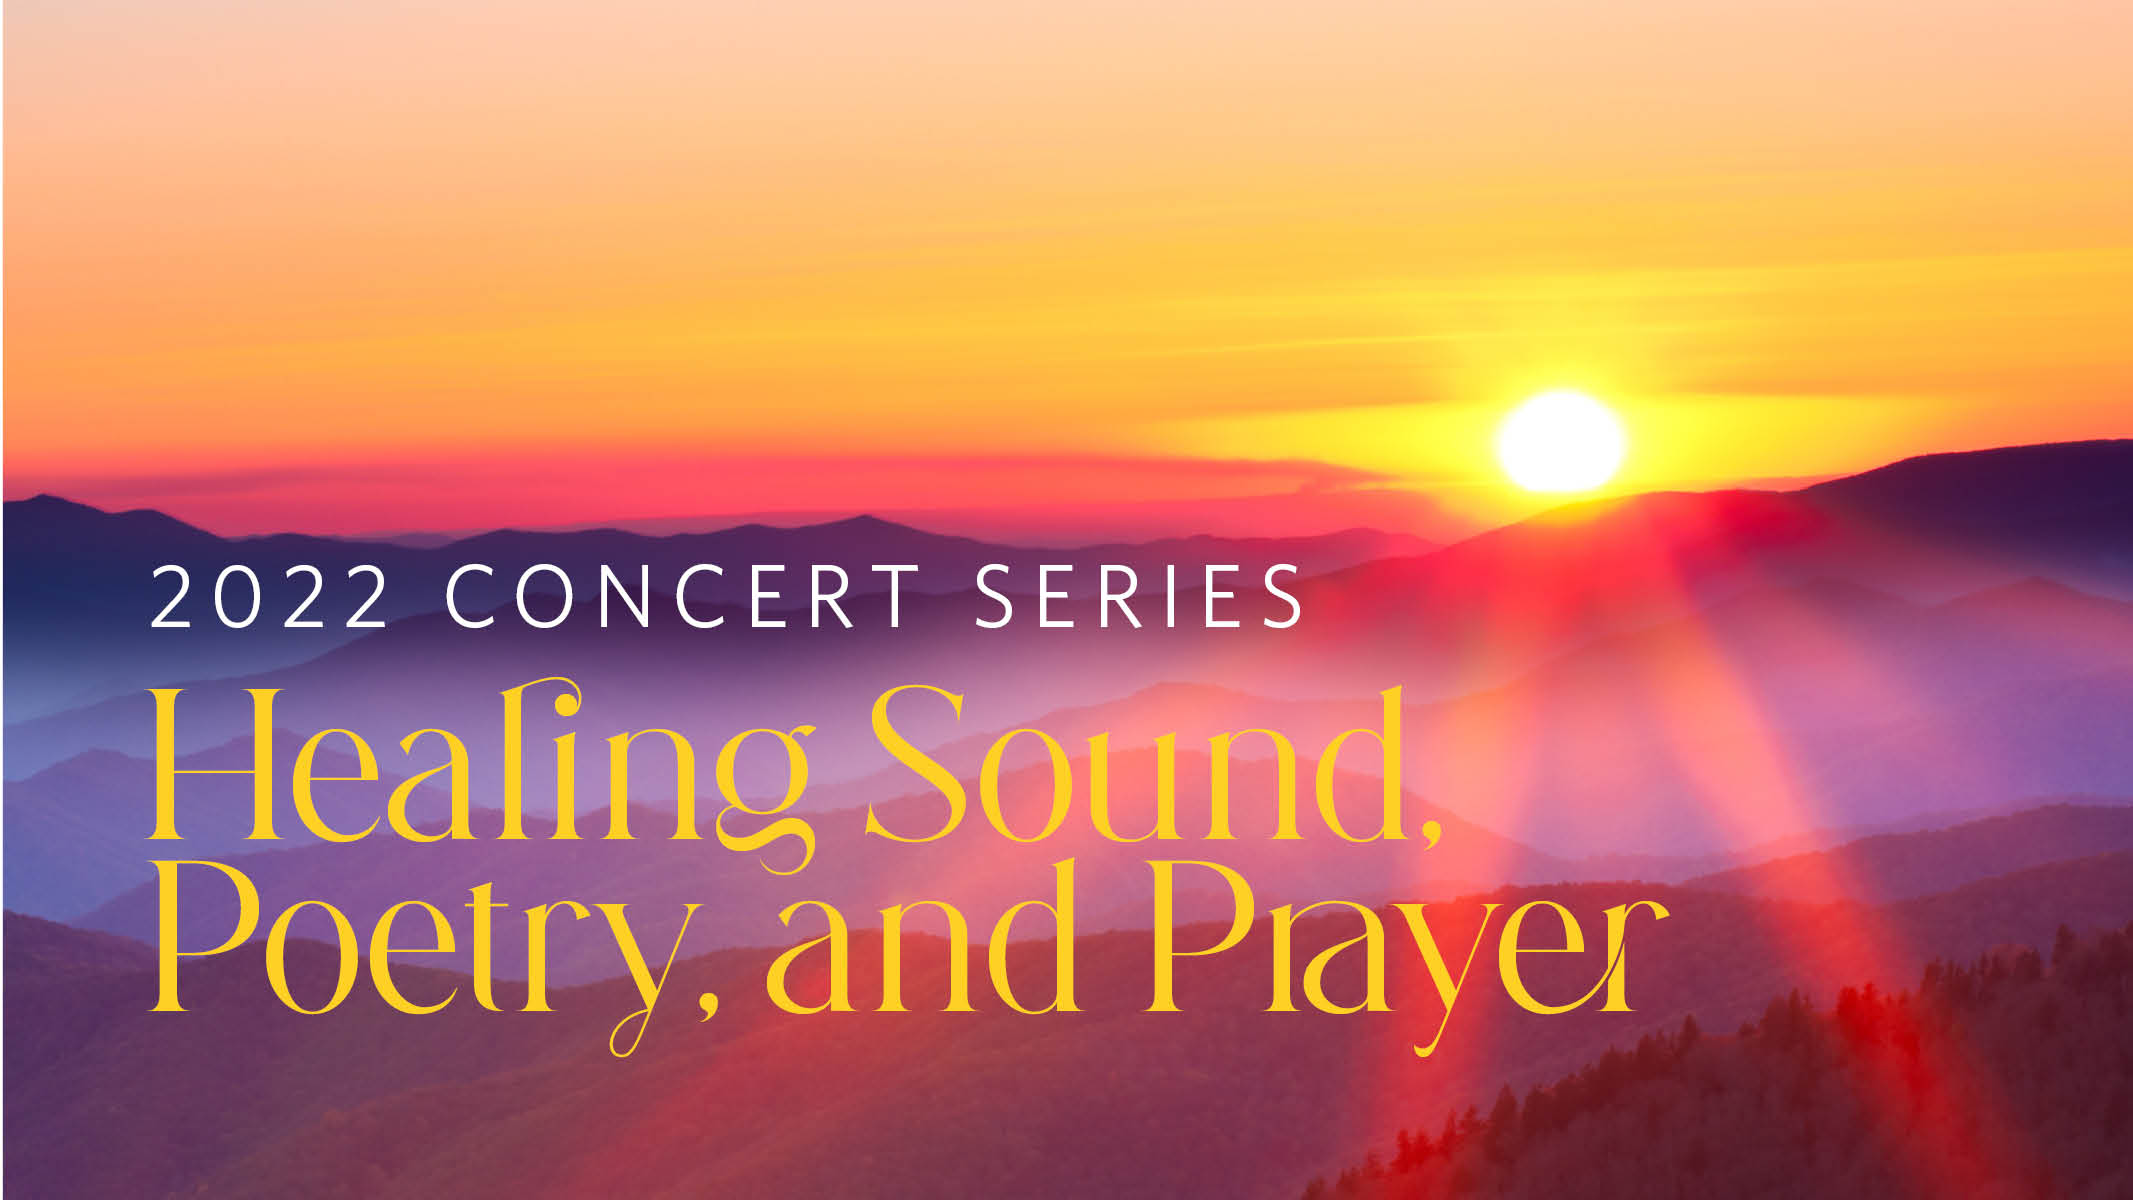 2022 Concert Series: Healing Sound, Poetry, and Prayer